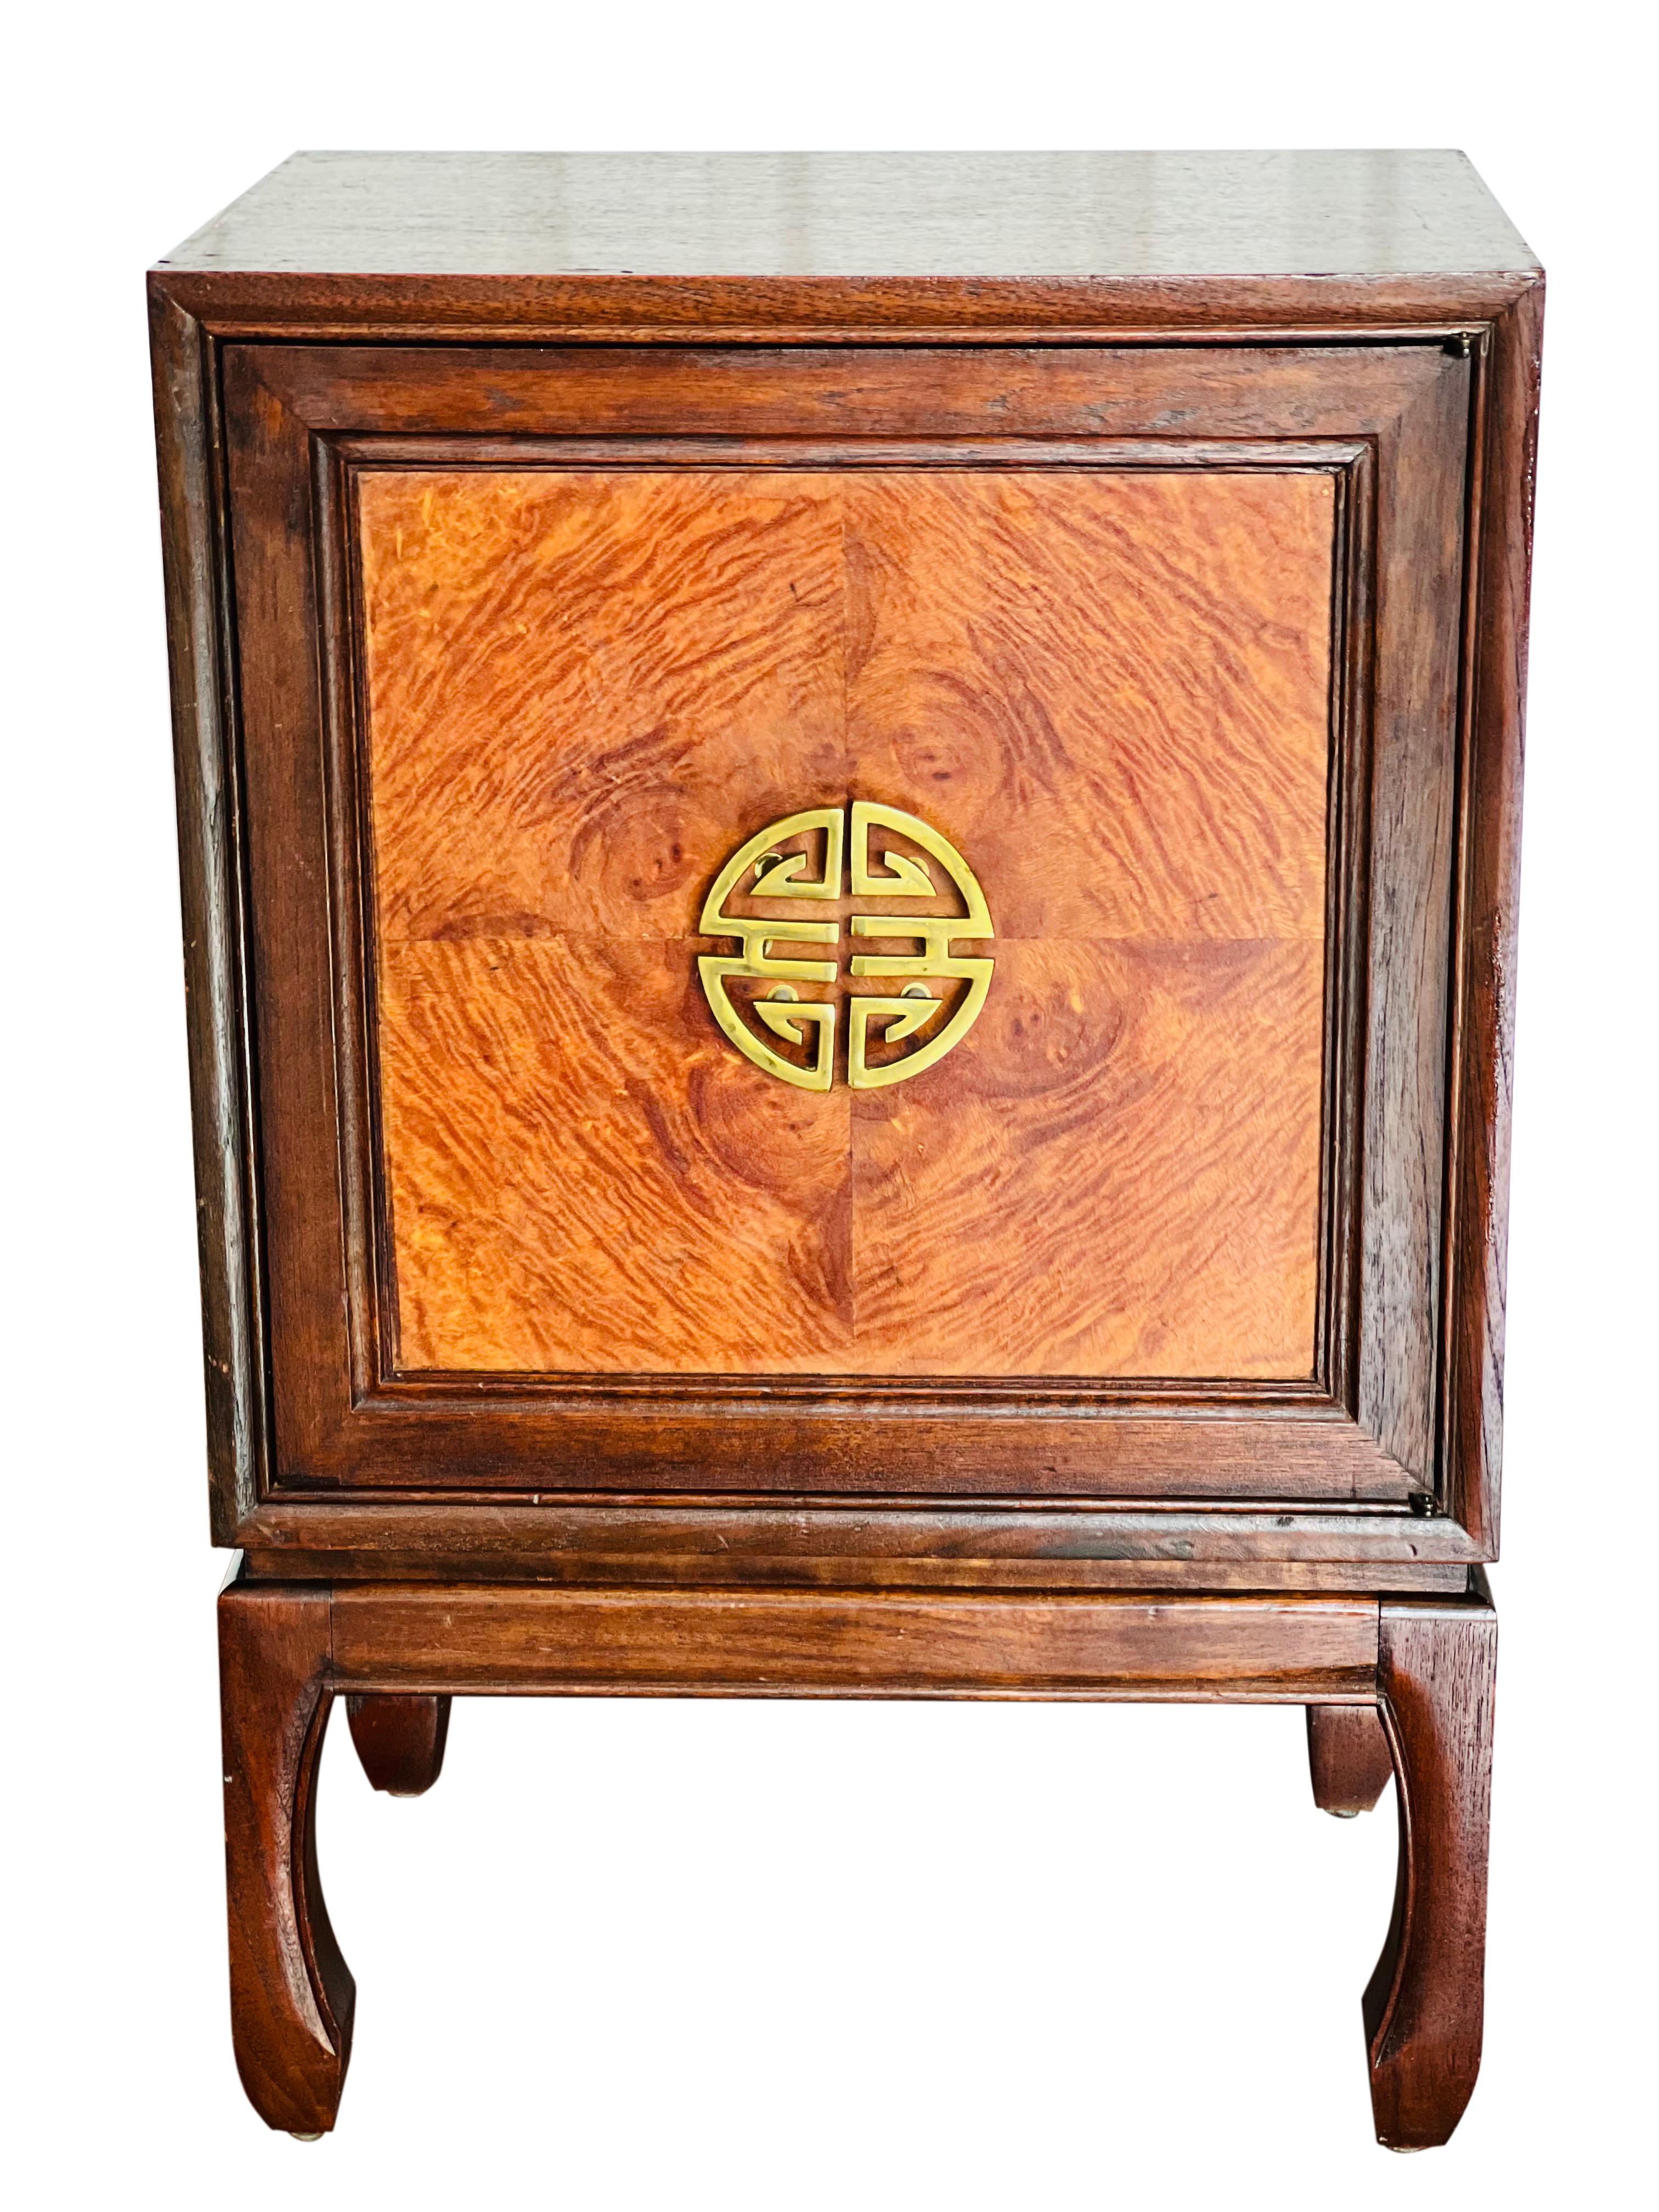 Early 20th Century Asian Style Petite Pipe and Tobacco Cabinet For Sale 8